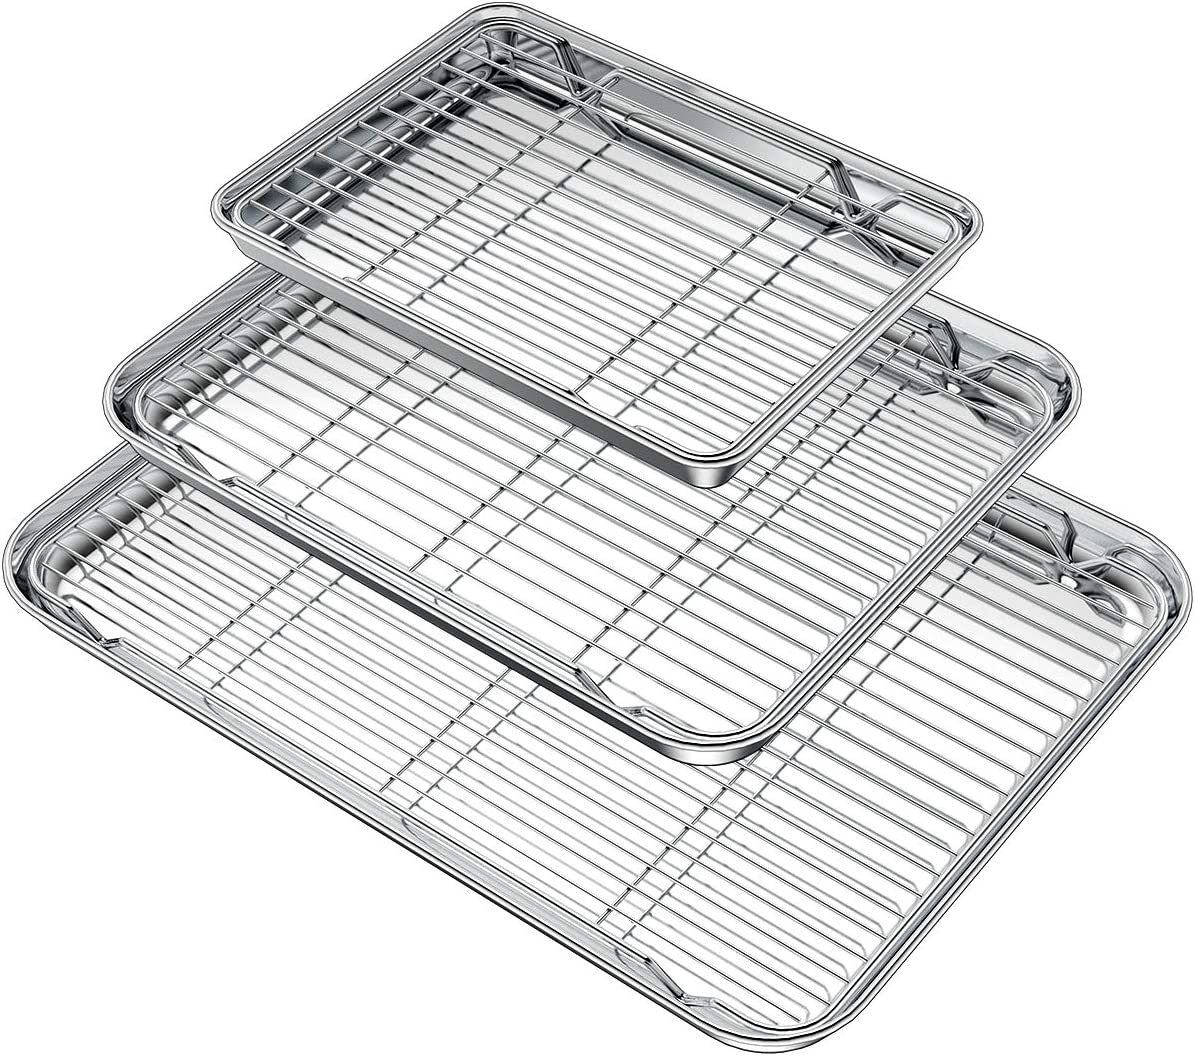 Baking Sheet with Rack Set [2 Pans + 2 Racks], Wildone Stainless Steel  Cookie Sheet Baking Pan Tray with Cooling Rack, Size 16 x 12 x 1 Inch, Non